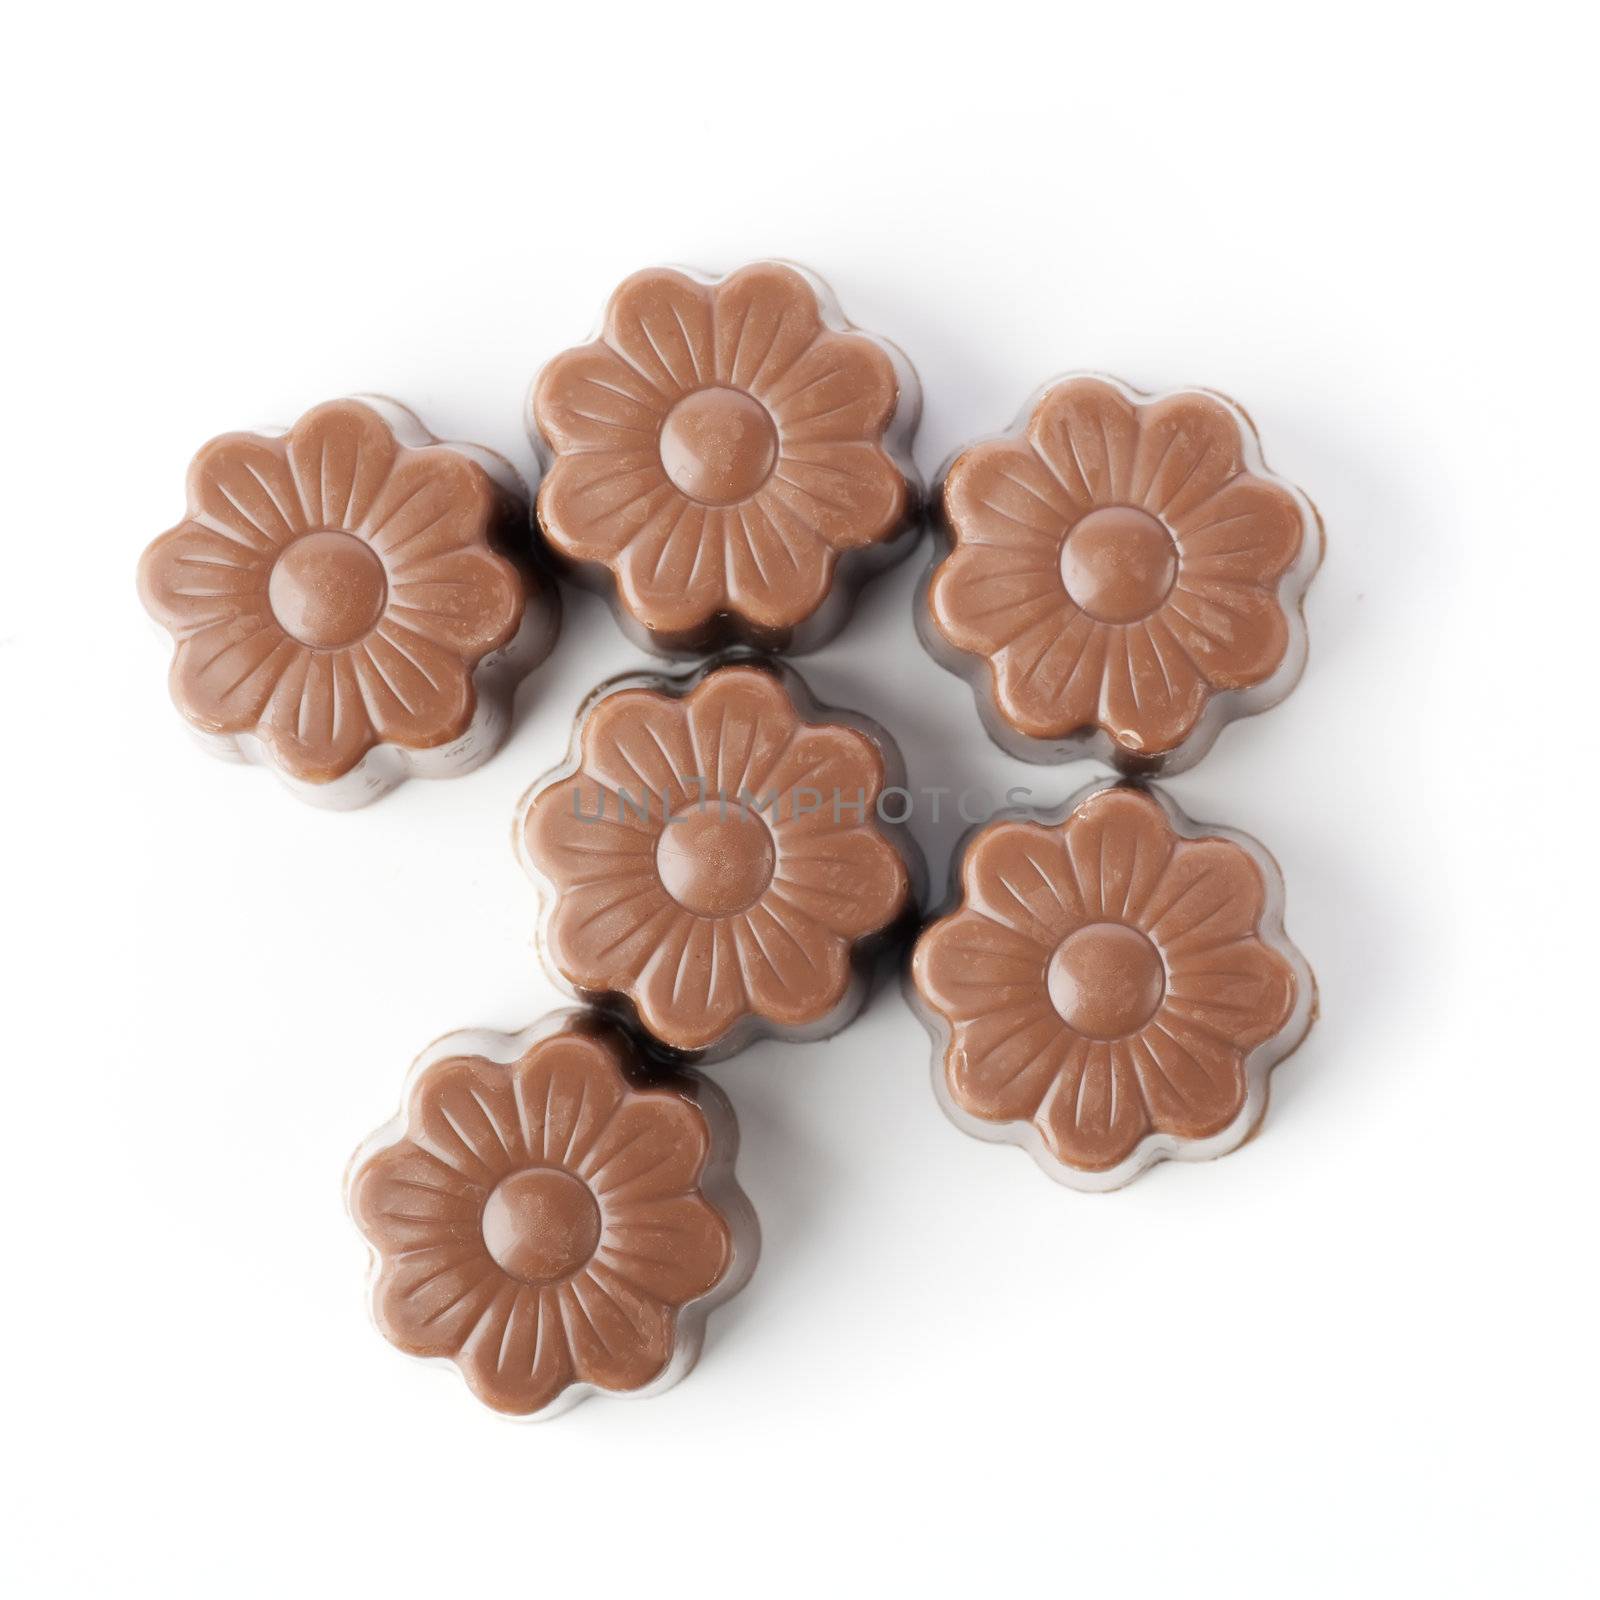 Five flower shaped milk chocolate candies on a white background.